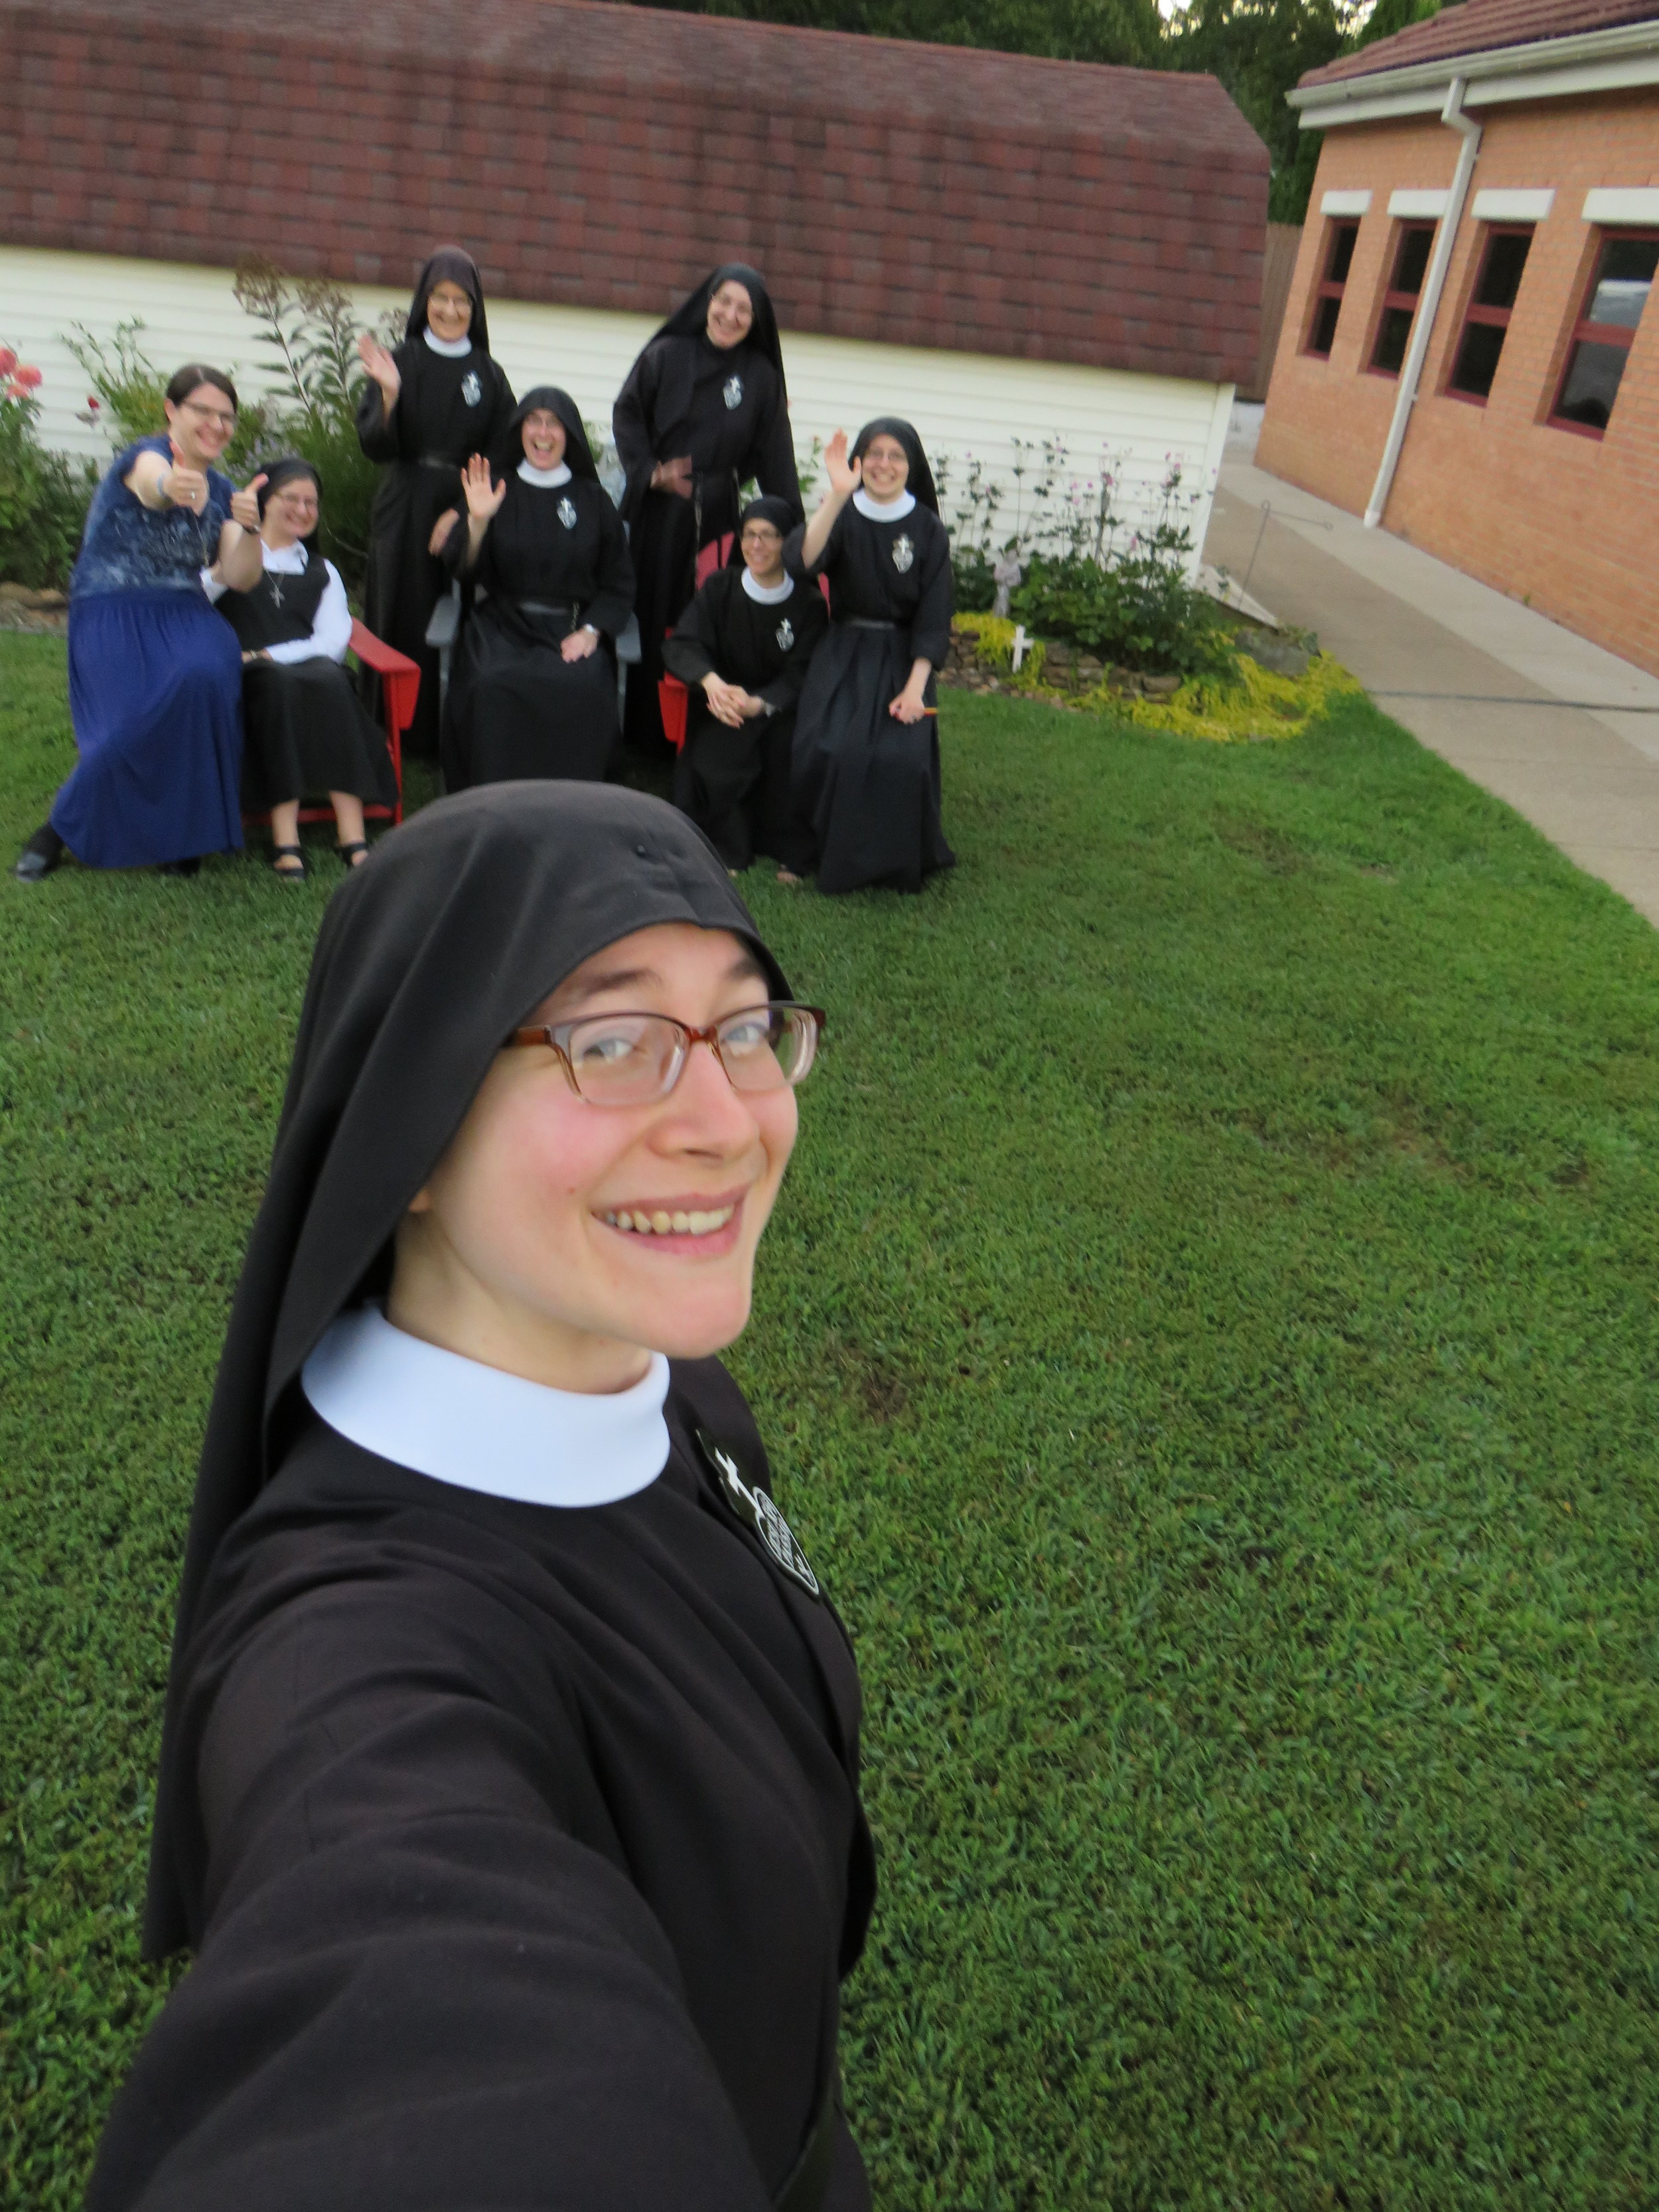  And, in an obediently snapped “selfie”, a rare glimpse of the Camera Nun! 